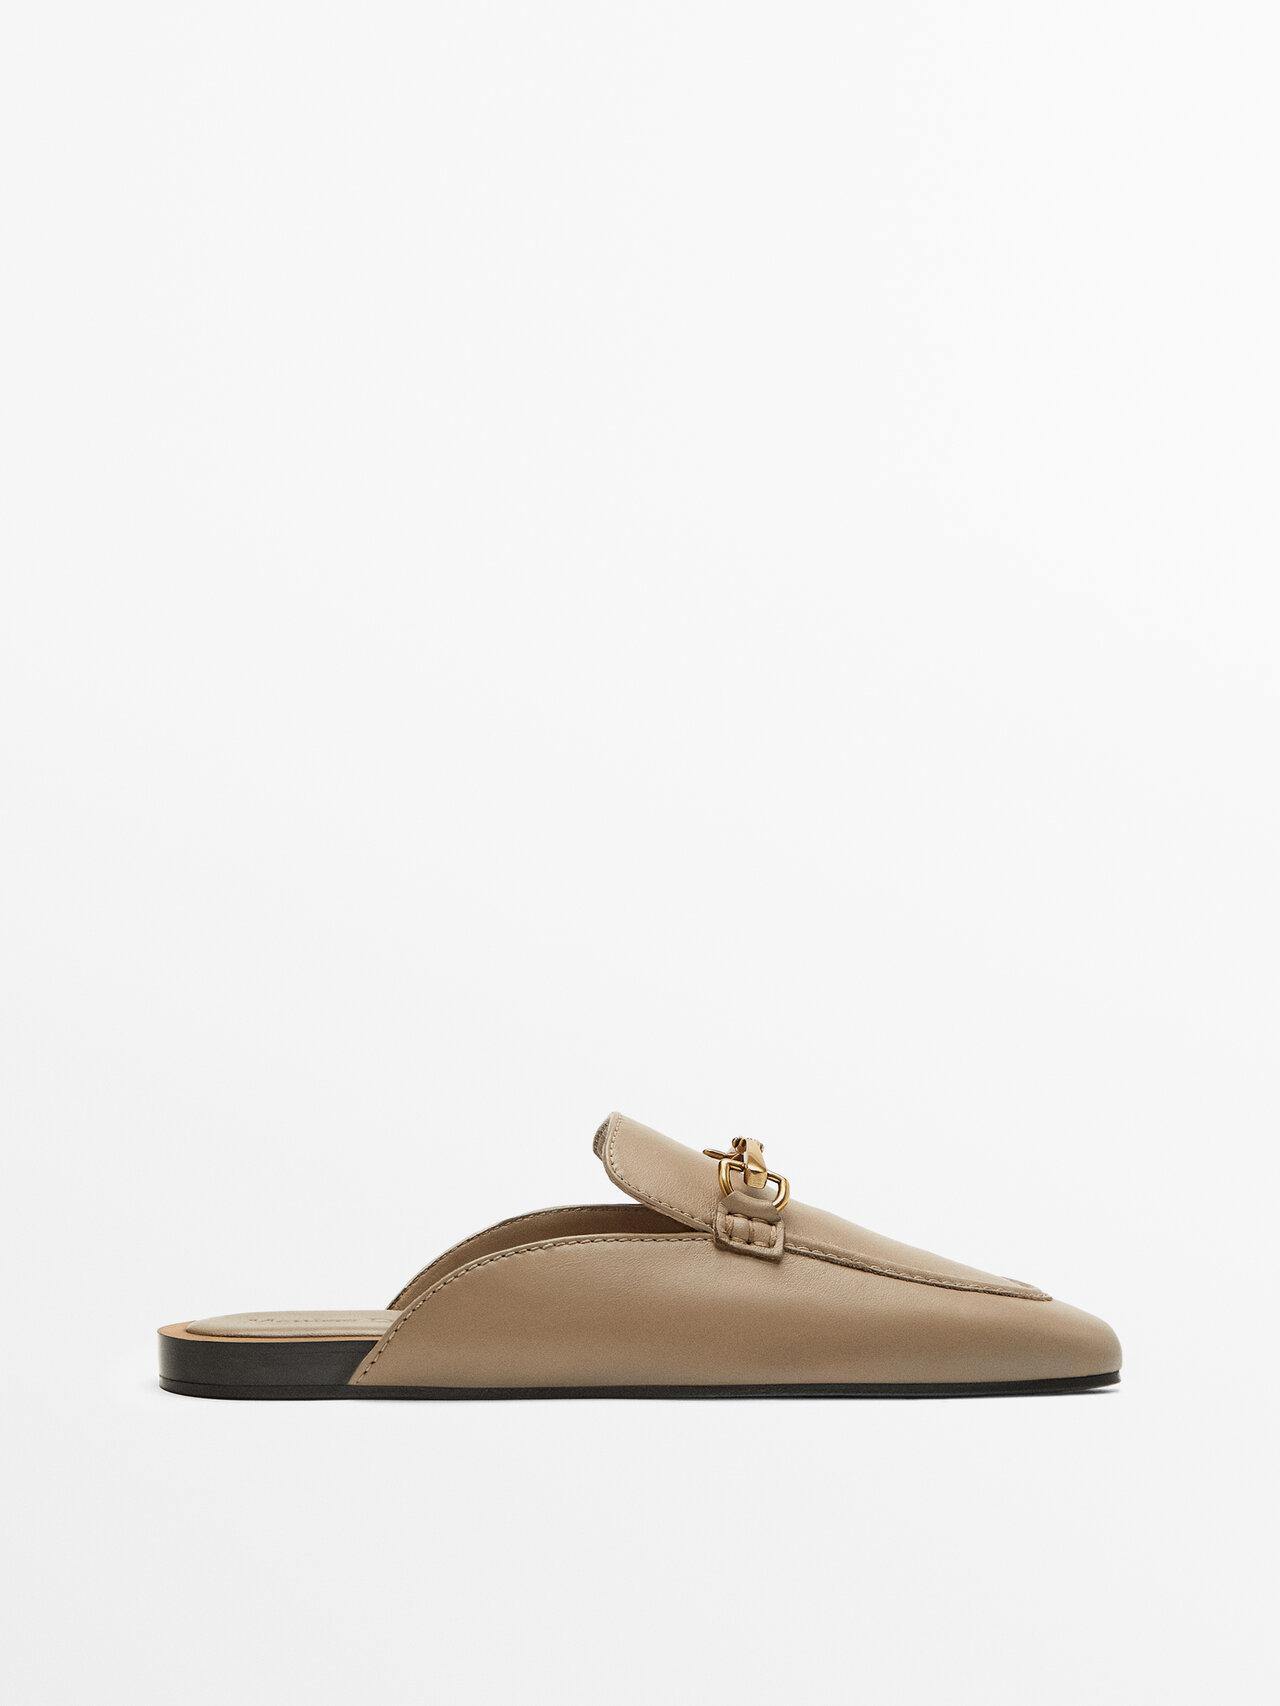 MASSIMO DUTTI Leather Mule Loafers With Buckle | Lyst